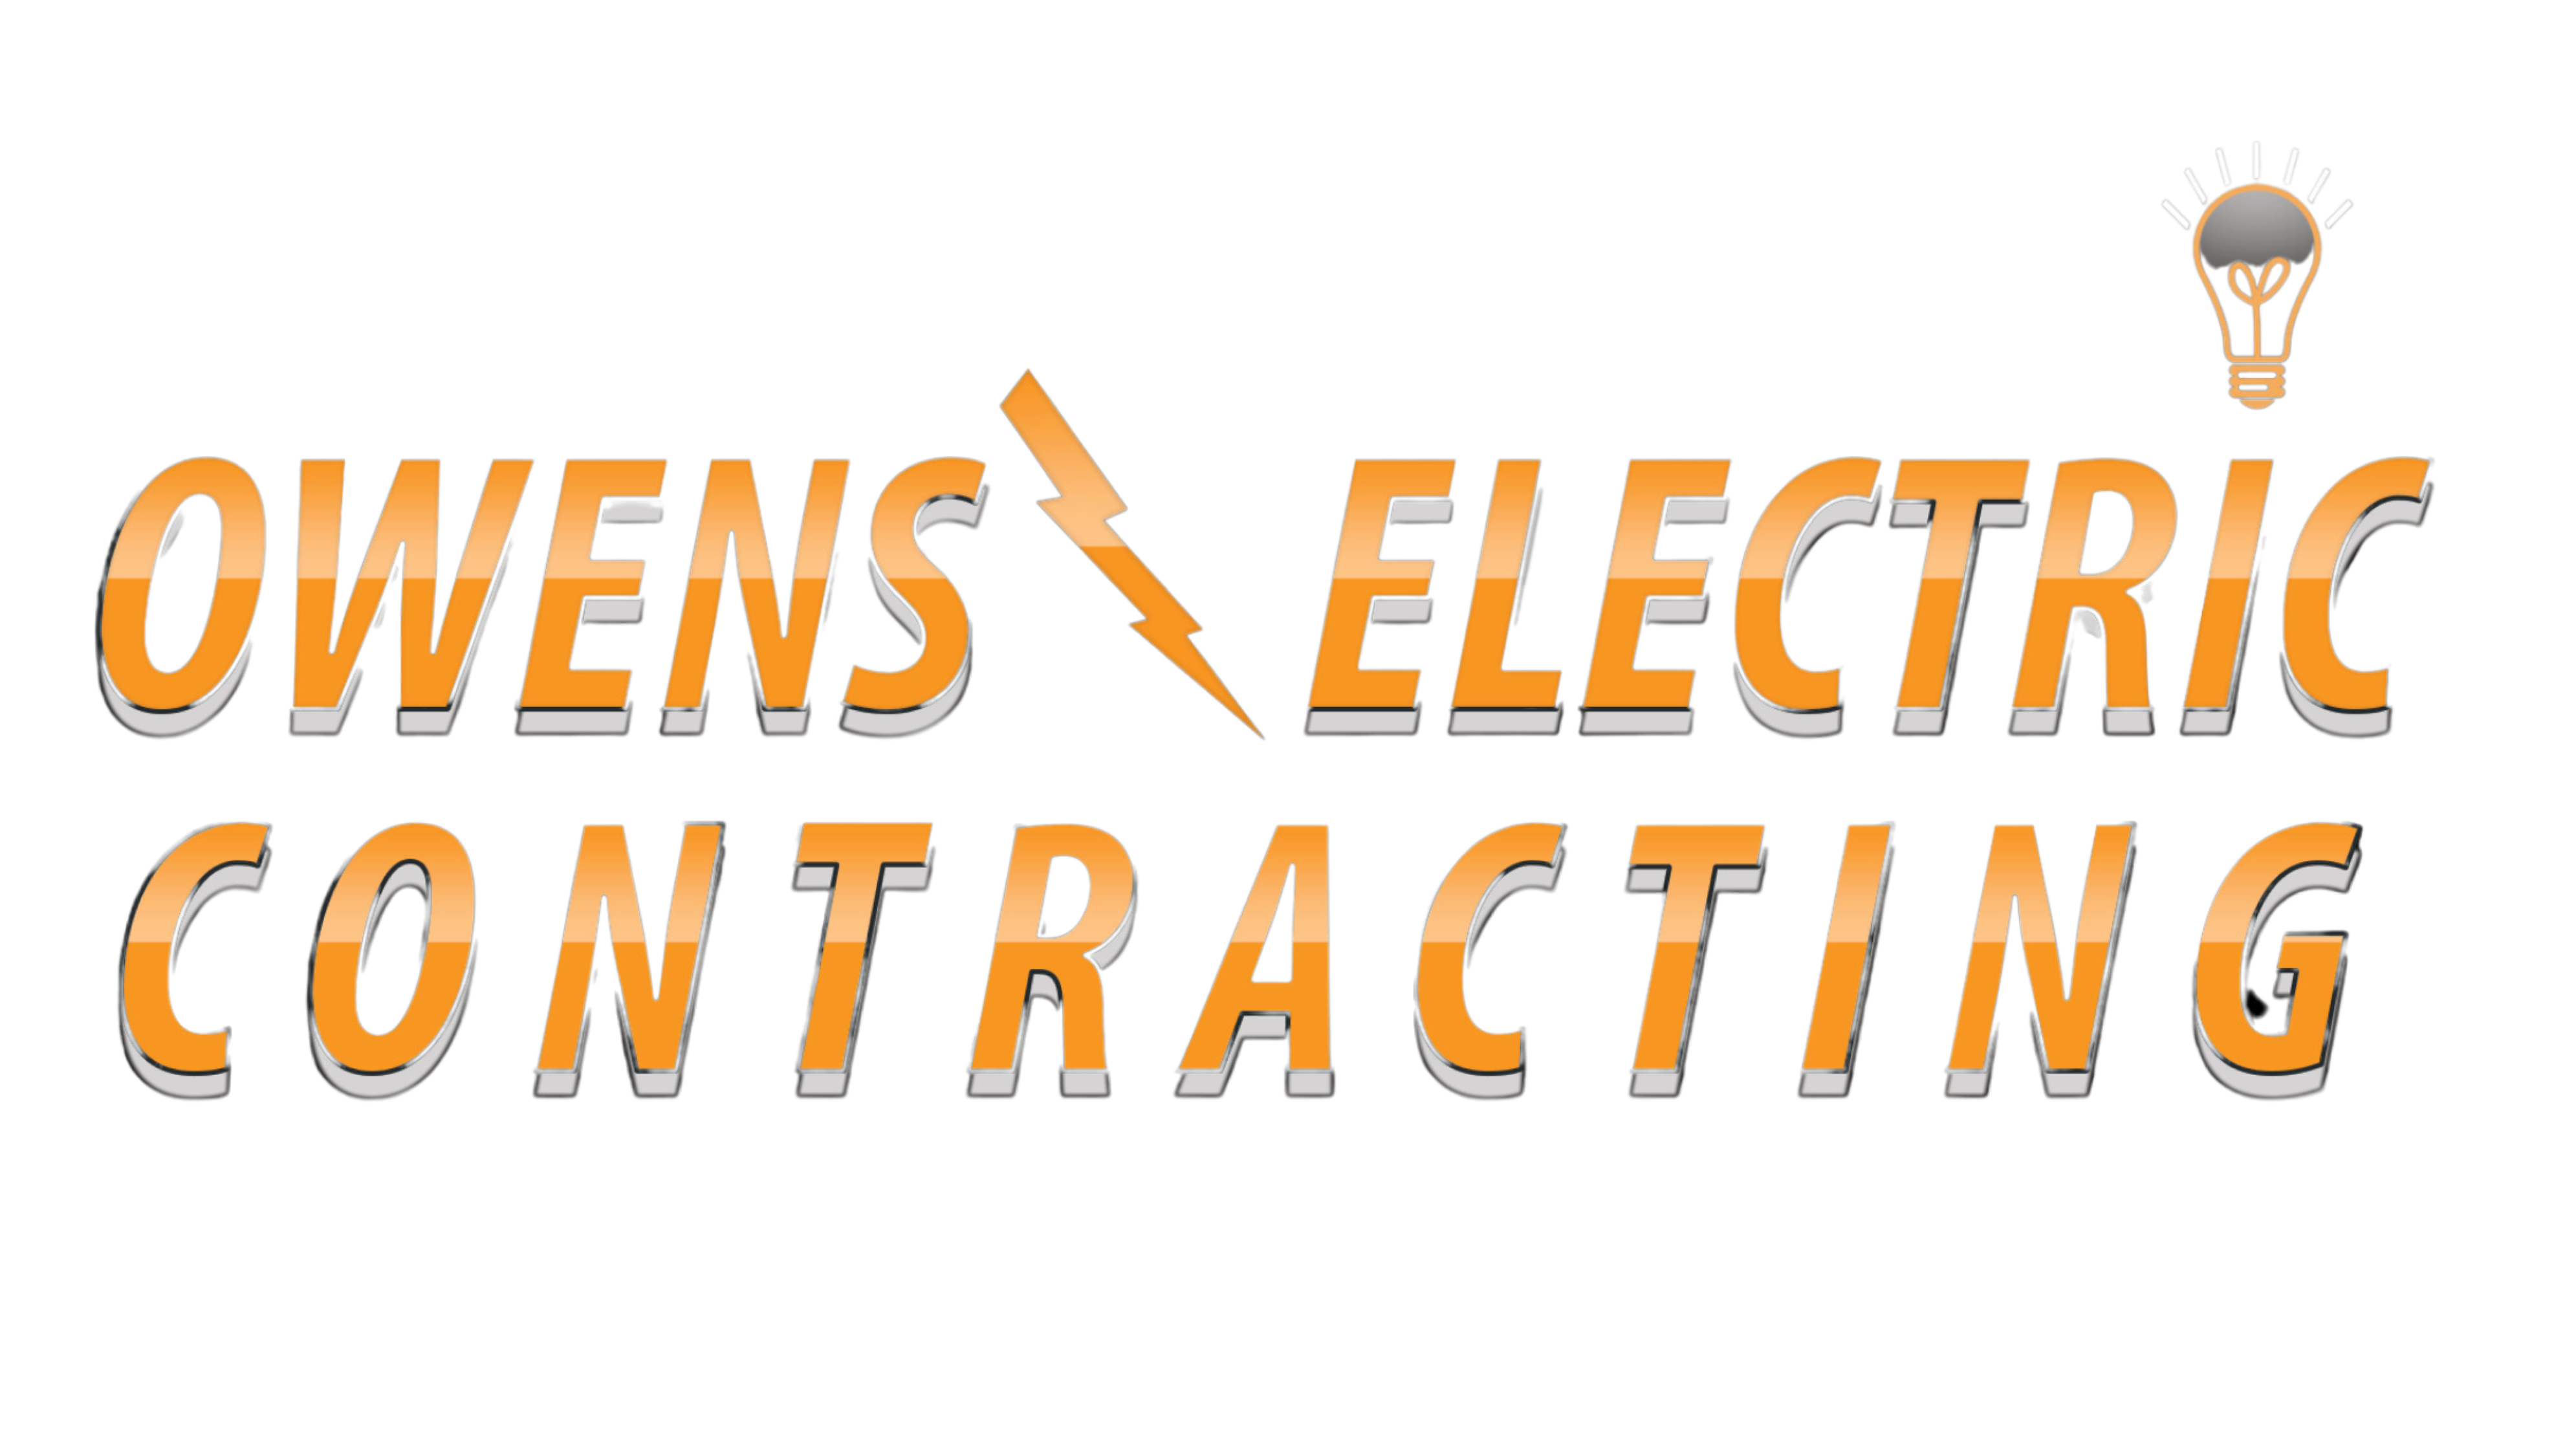 Owens Electric Contracting logo